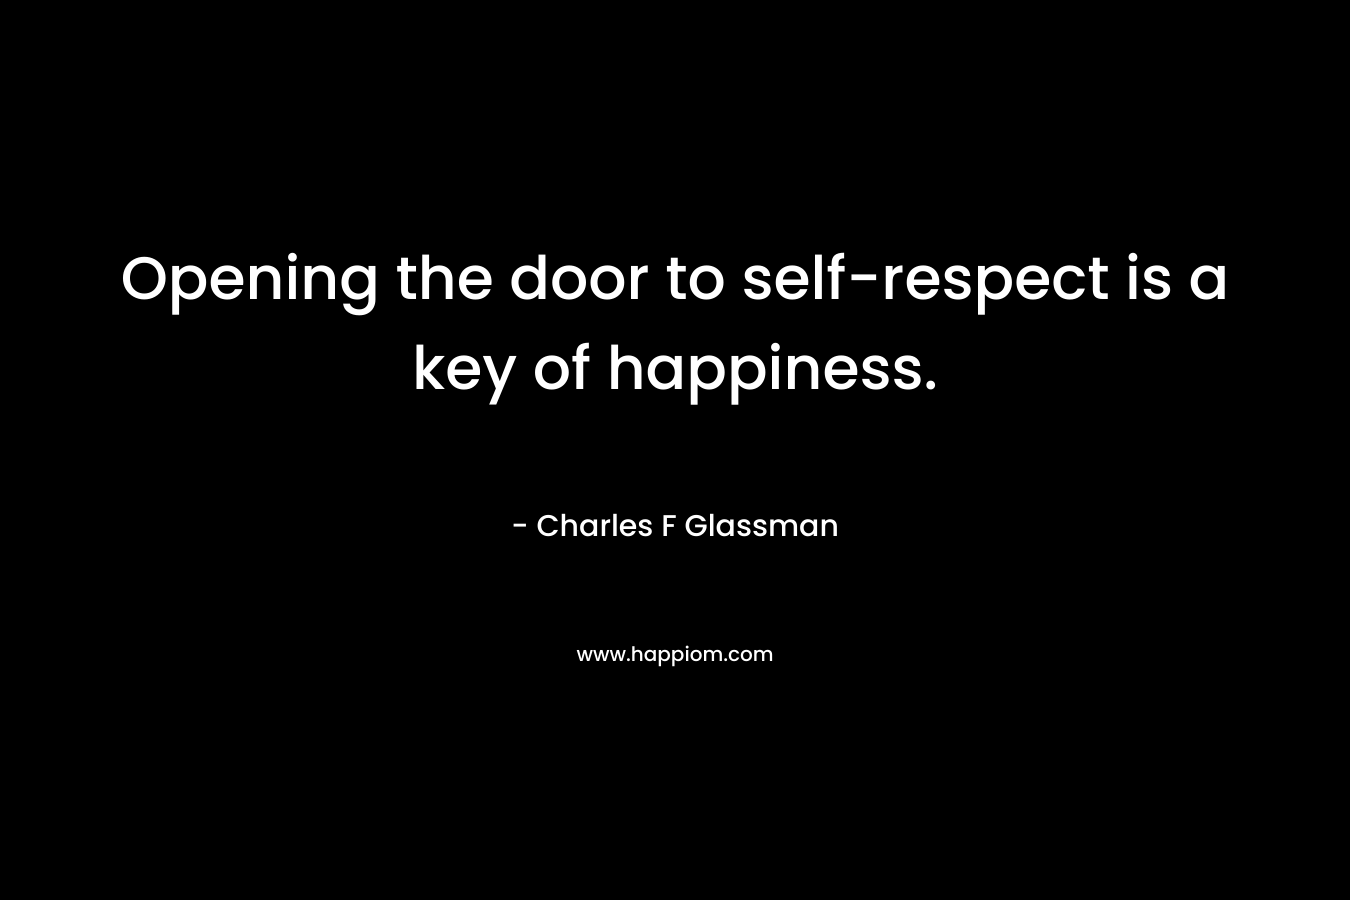 Opening the door to self-respect is a key of happiness. – Charles F Glassman